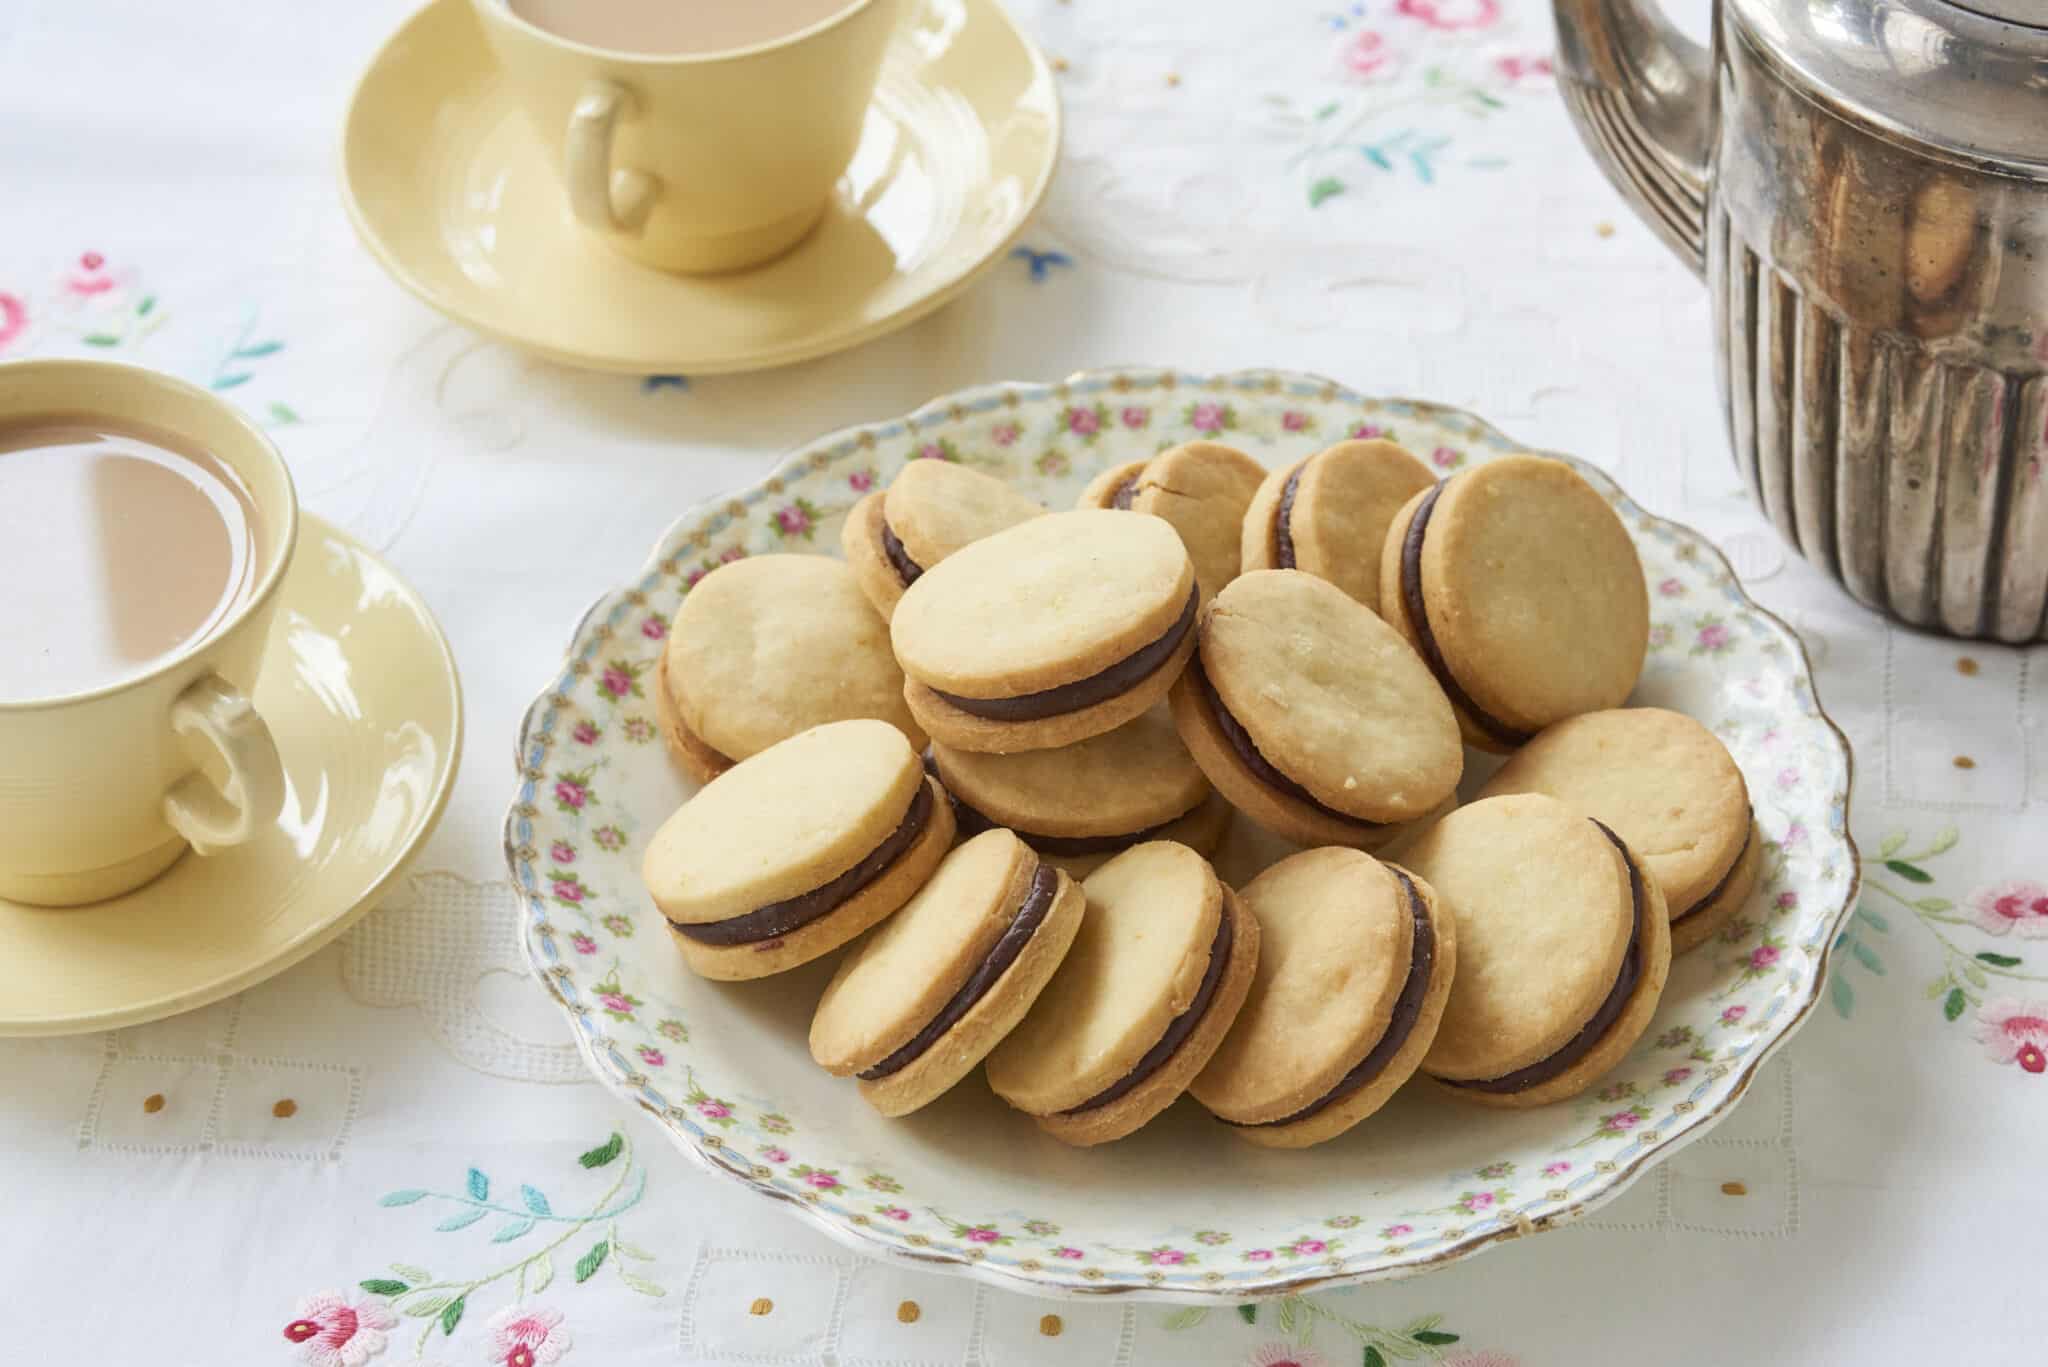 Sandwich cookies Orange Shortbread with Chocolate Orange Truffle Filling are perfectly round. They are served in a large floral platter with two cups of tea.